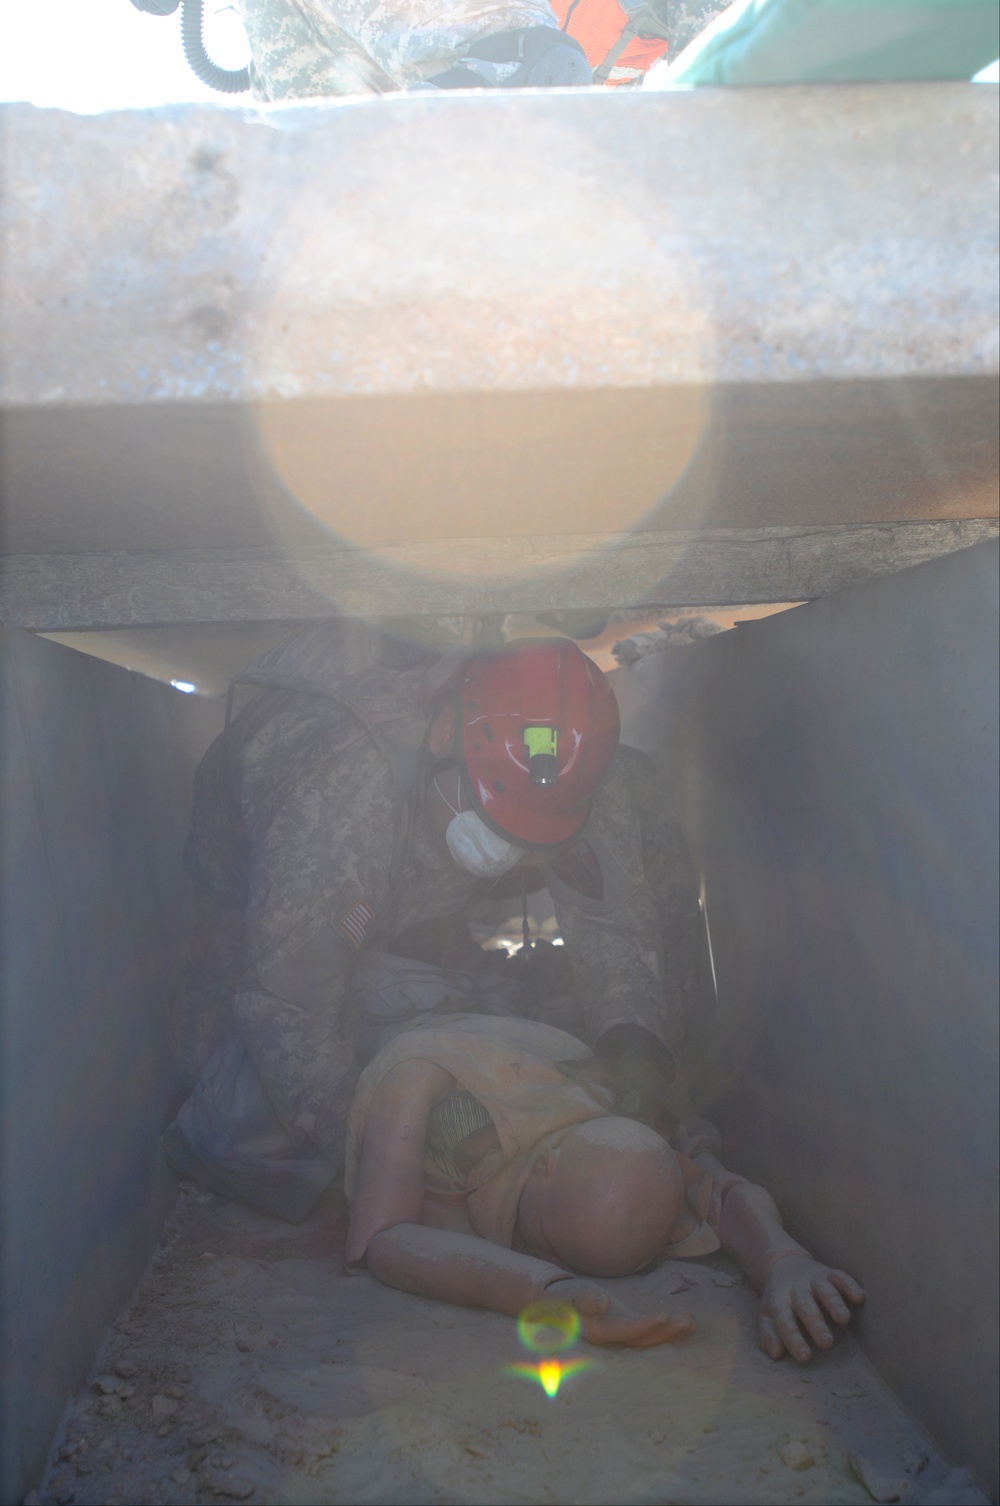 836th Engineer Company participate in a collapsed structure extraction exercise